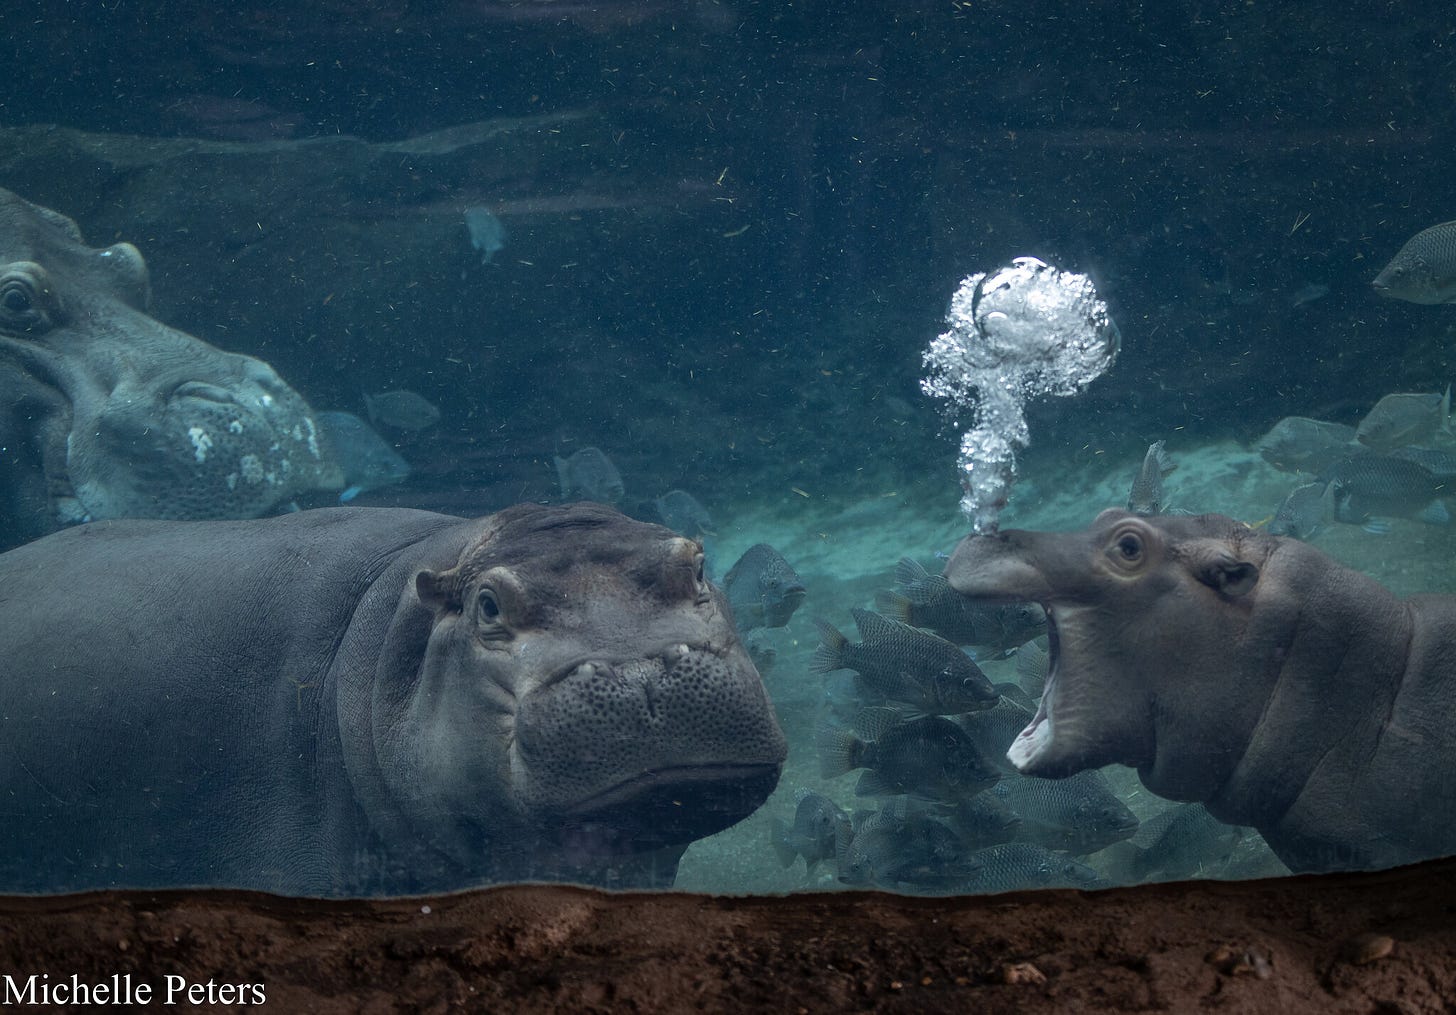 fiona the hippo faces the camera looking annoyed, while fritz (smaller) faces her with his mouth wide open with bubbles coming out